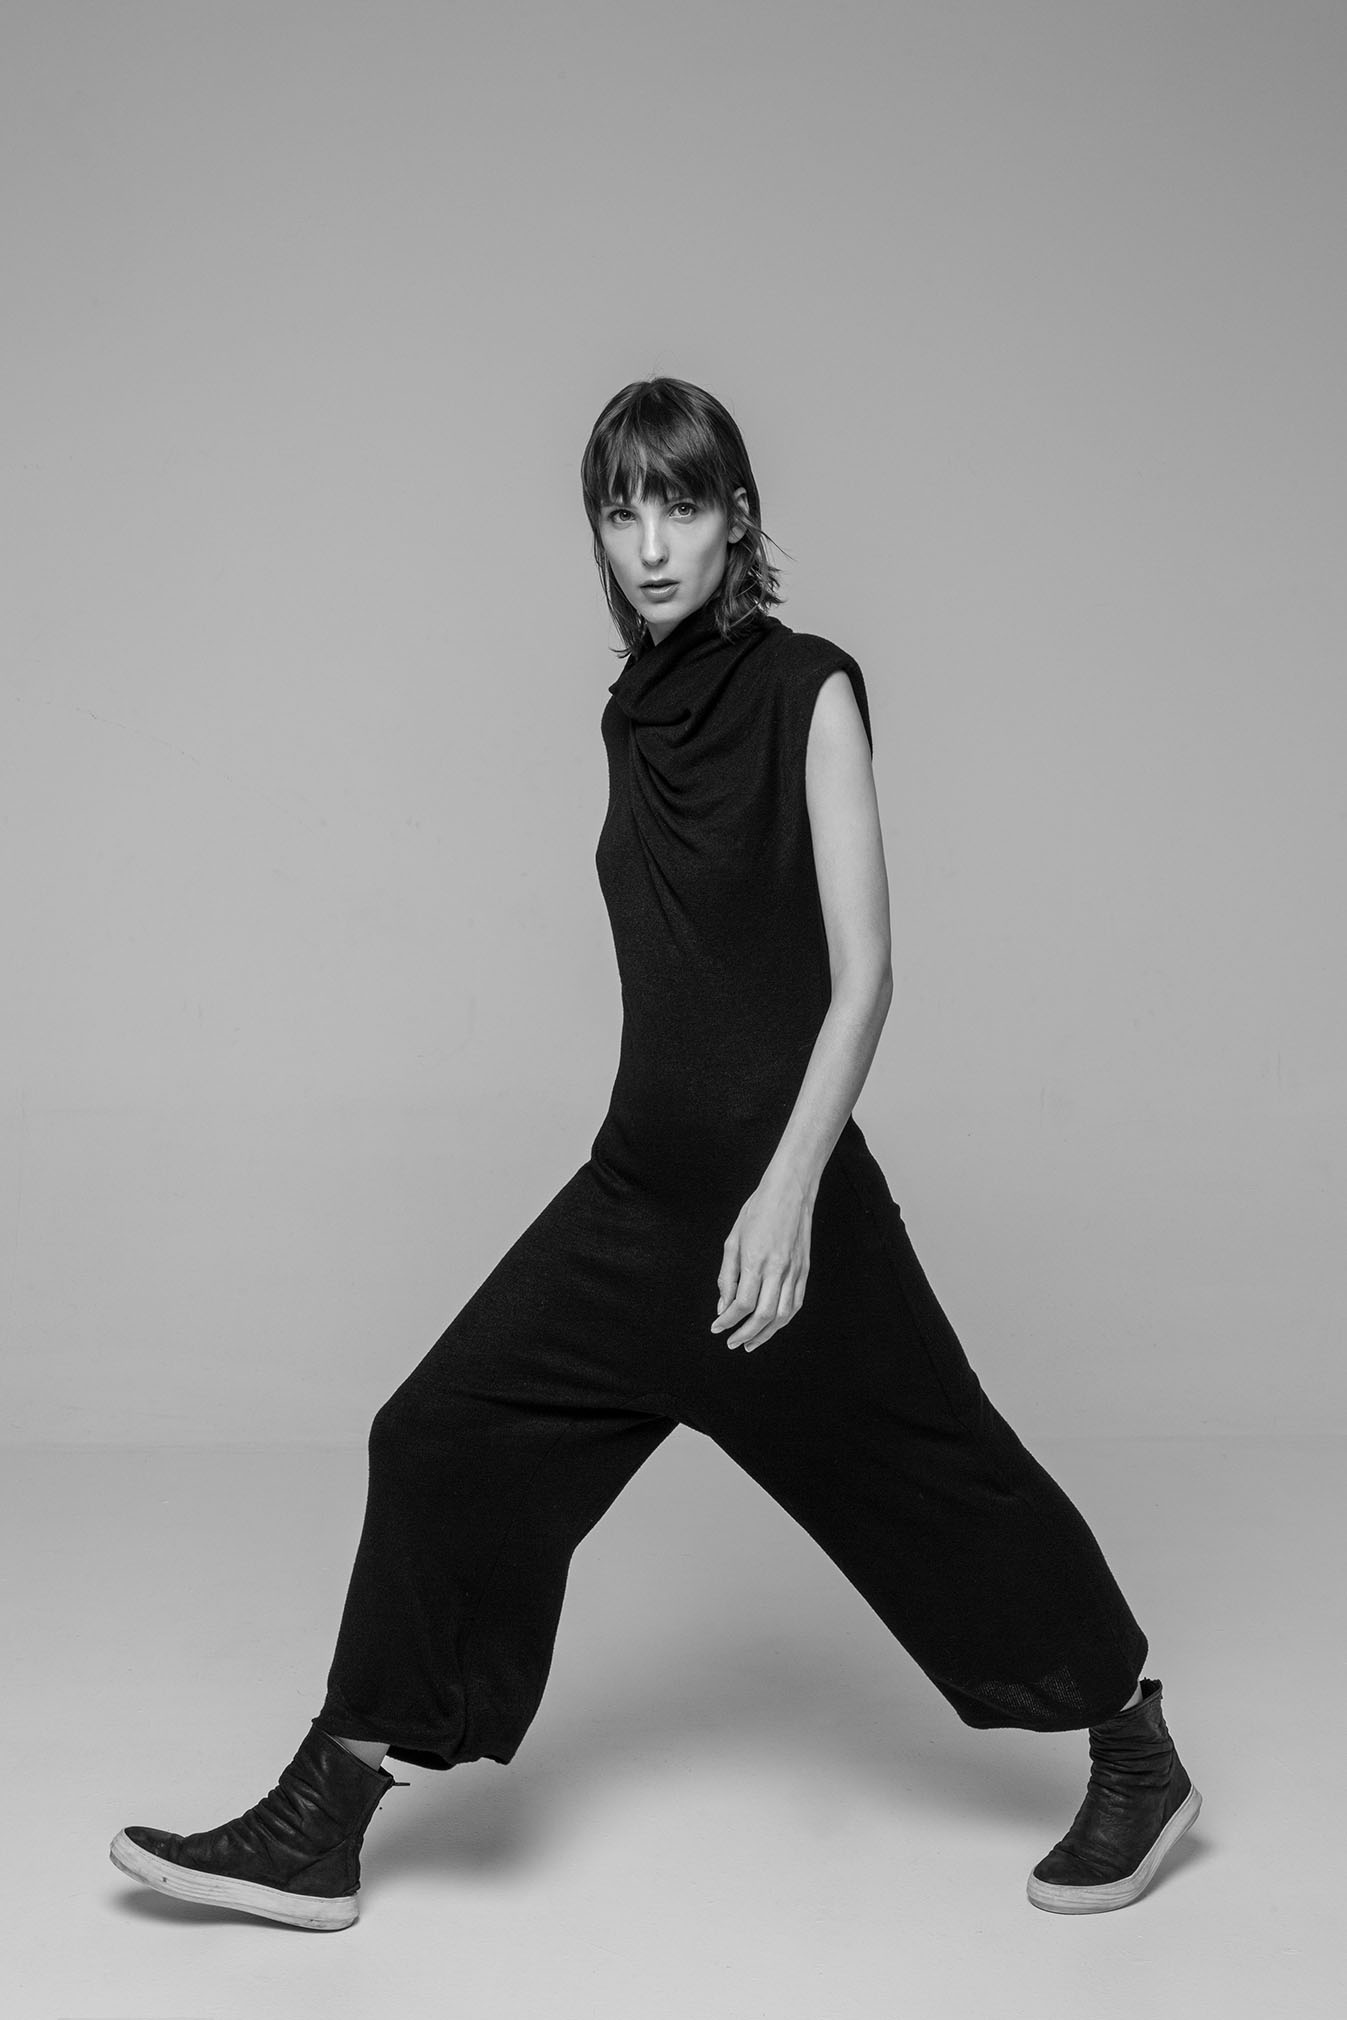 Women's Low Crotch Jumpsuit by Noble Athens Store